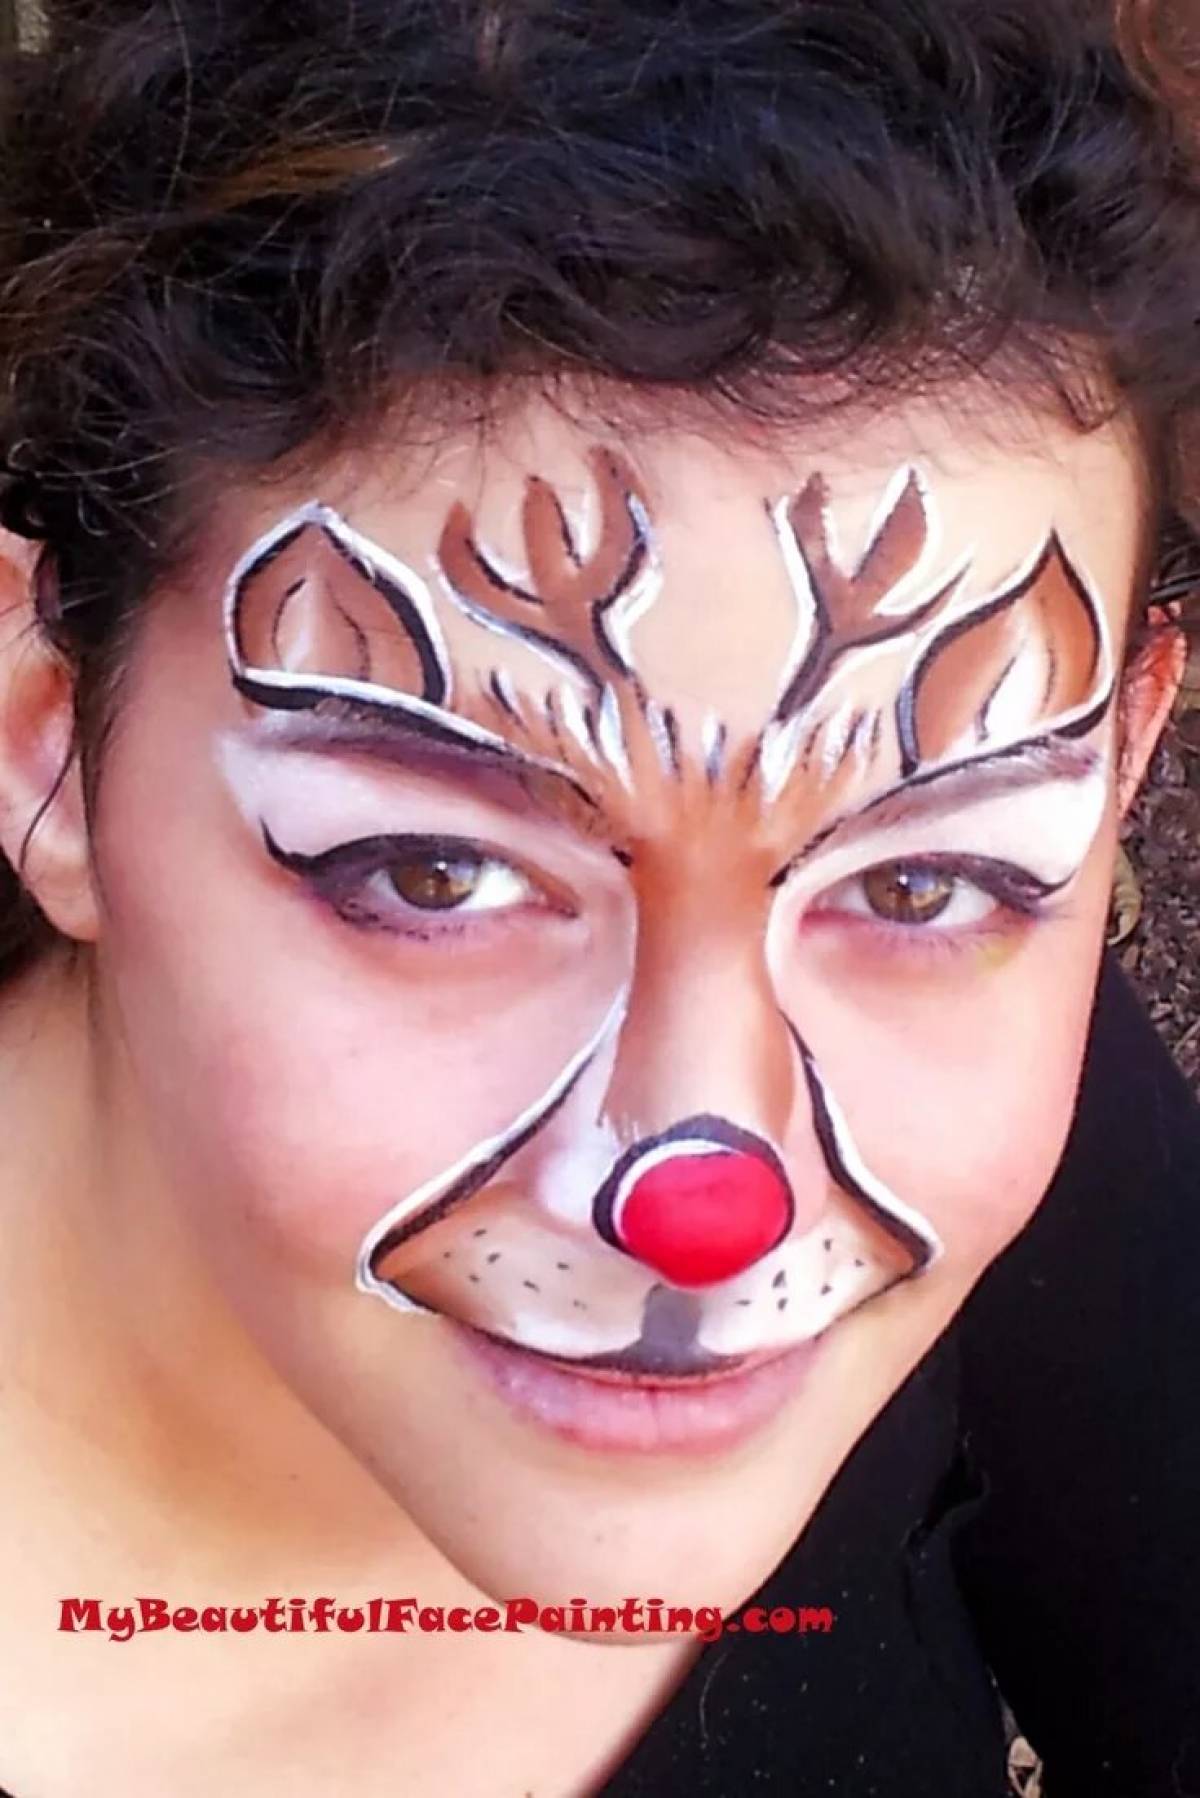 Live Christmas face painting